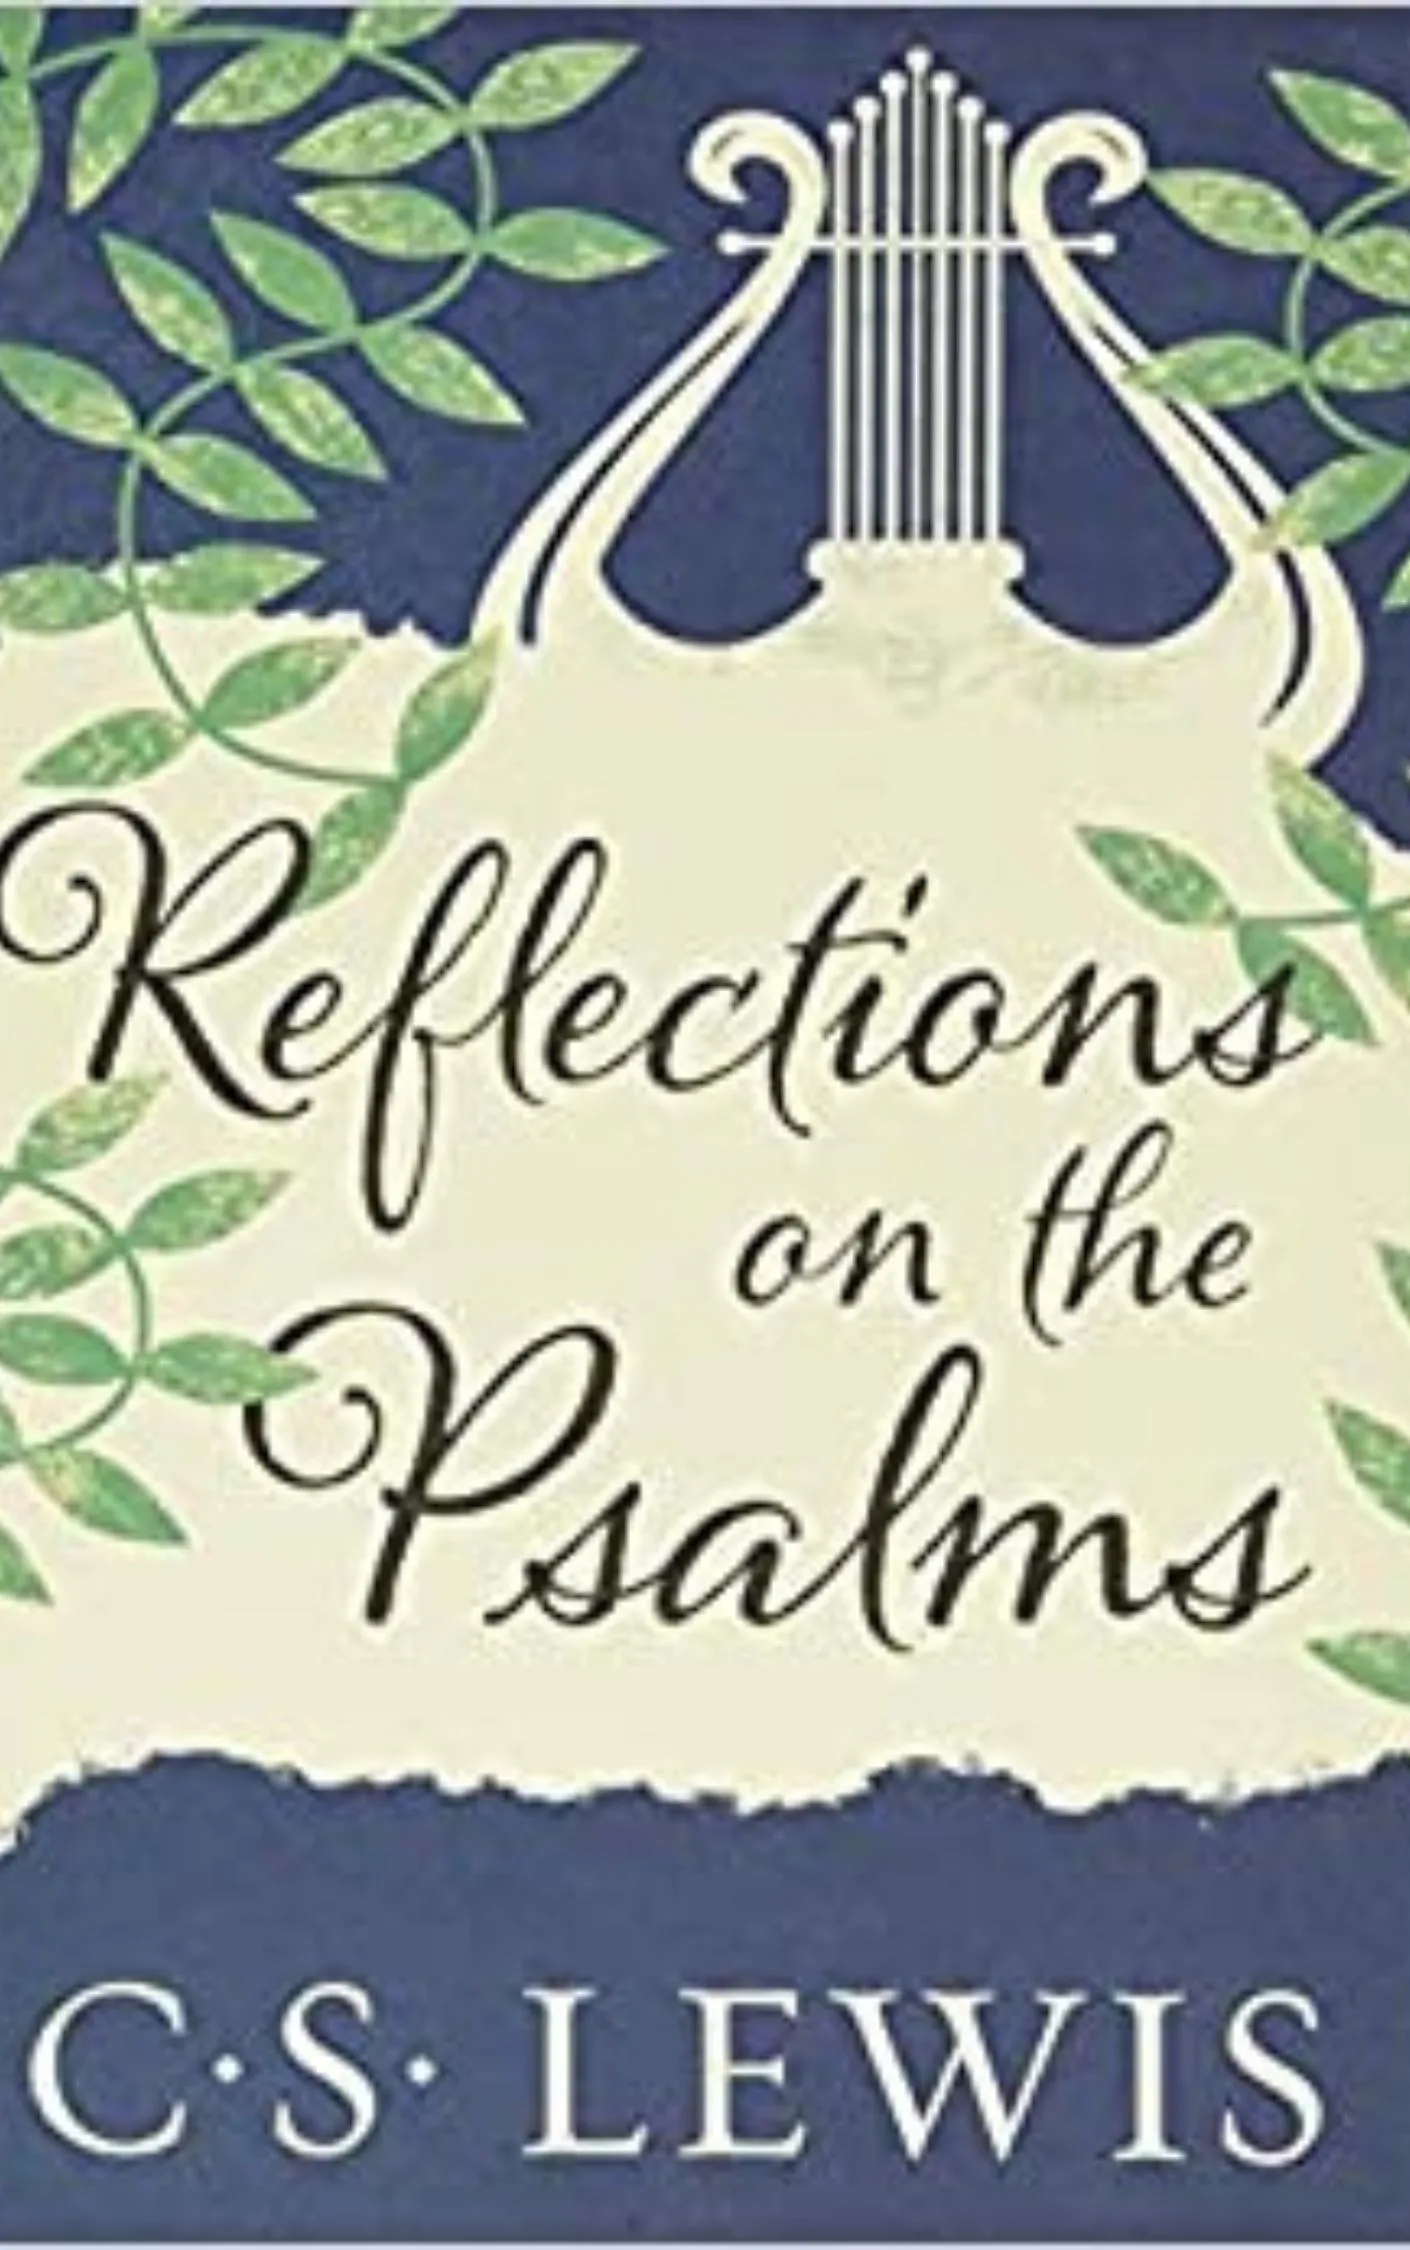 Reflections on the Psalms by C.S. Lewis`